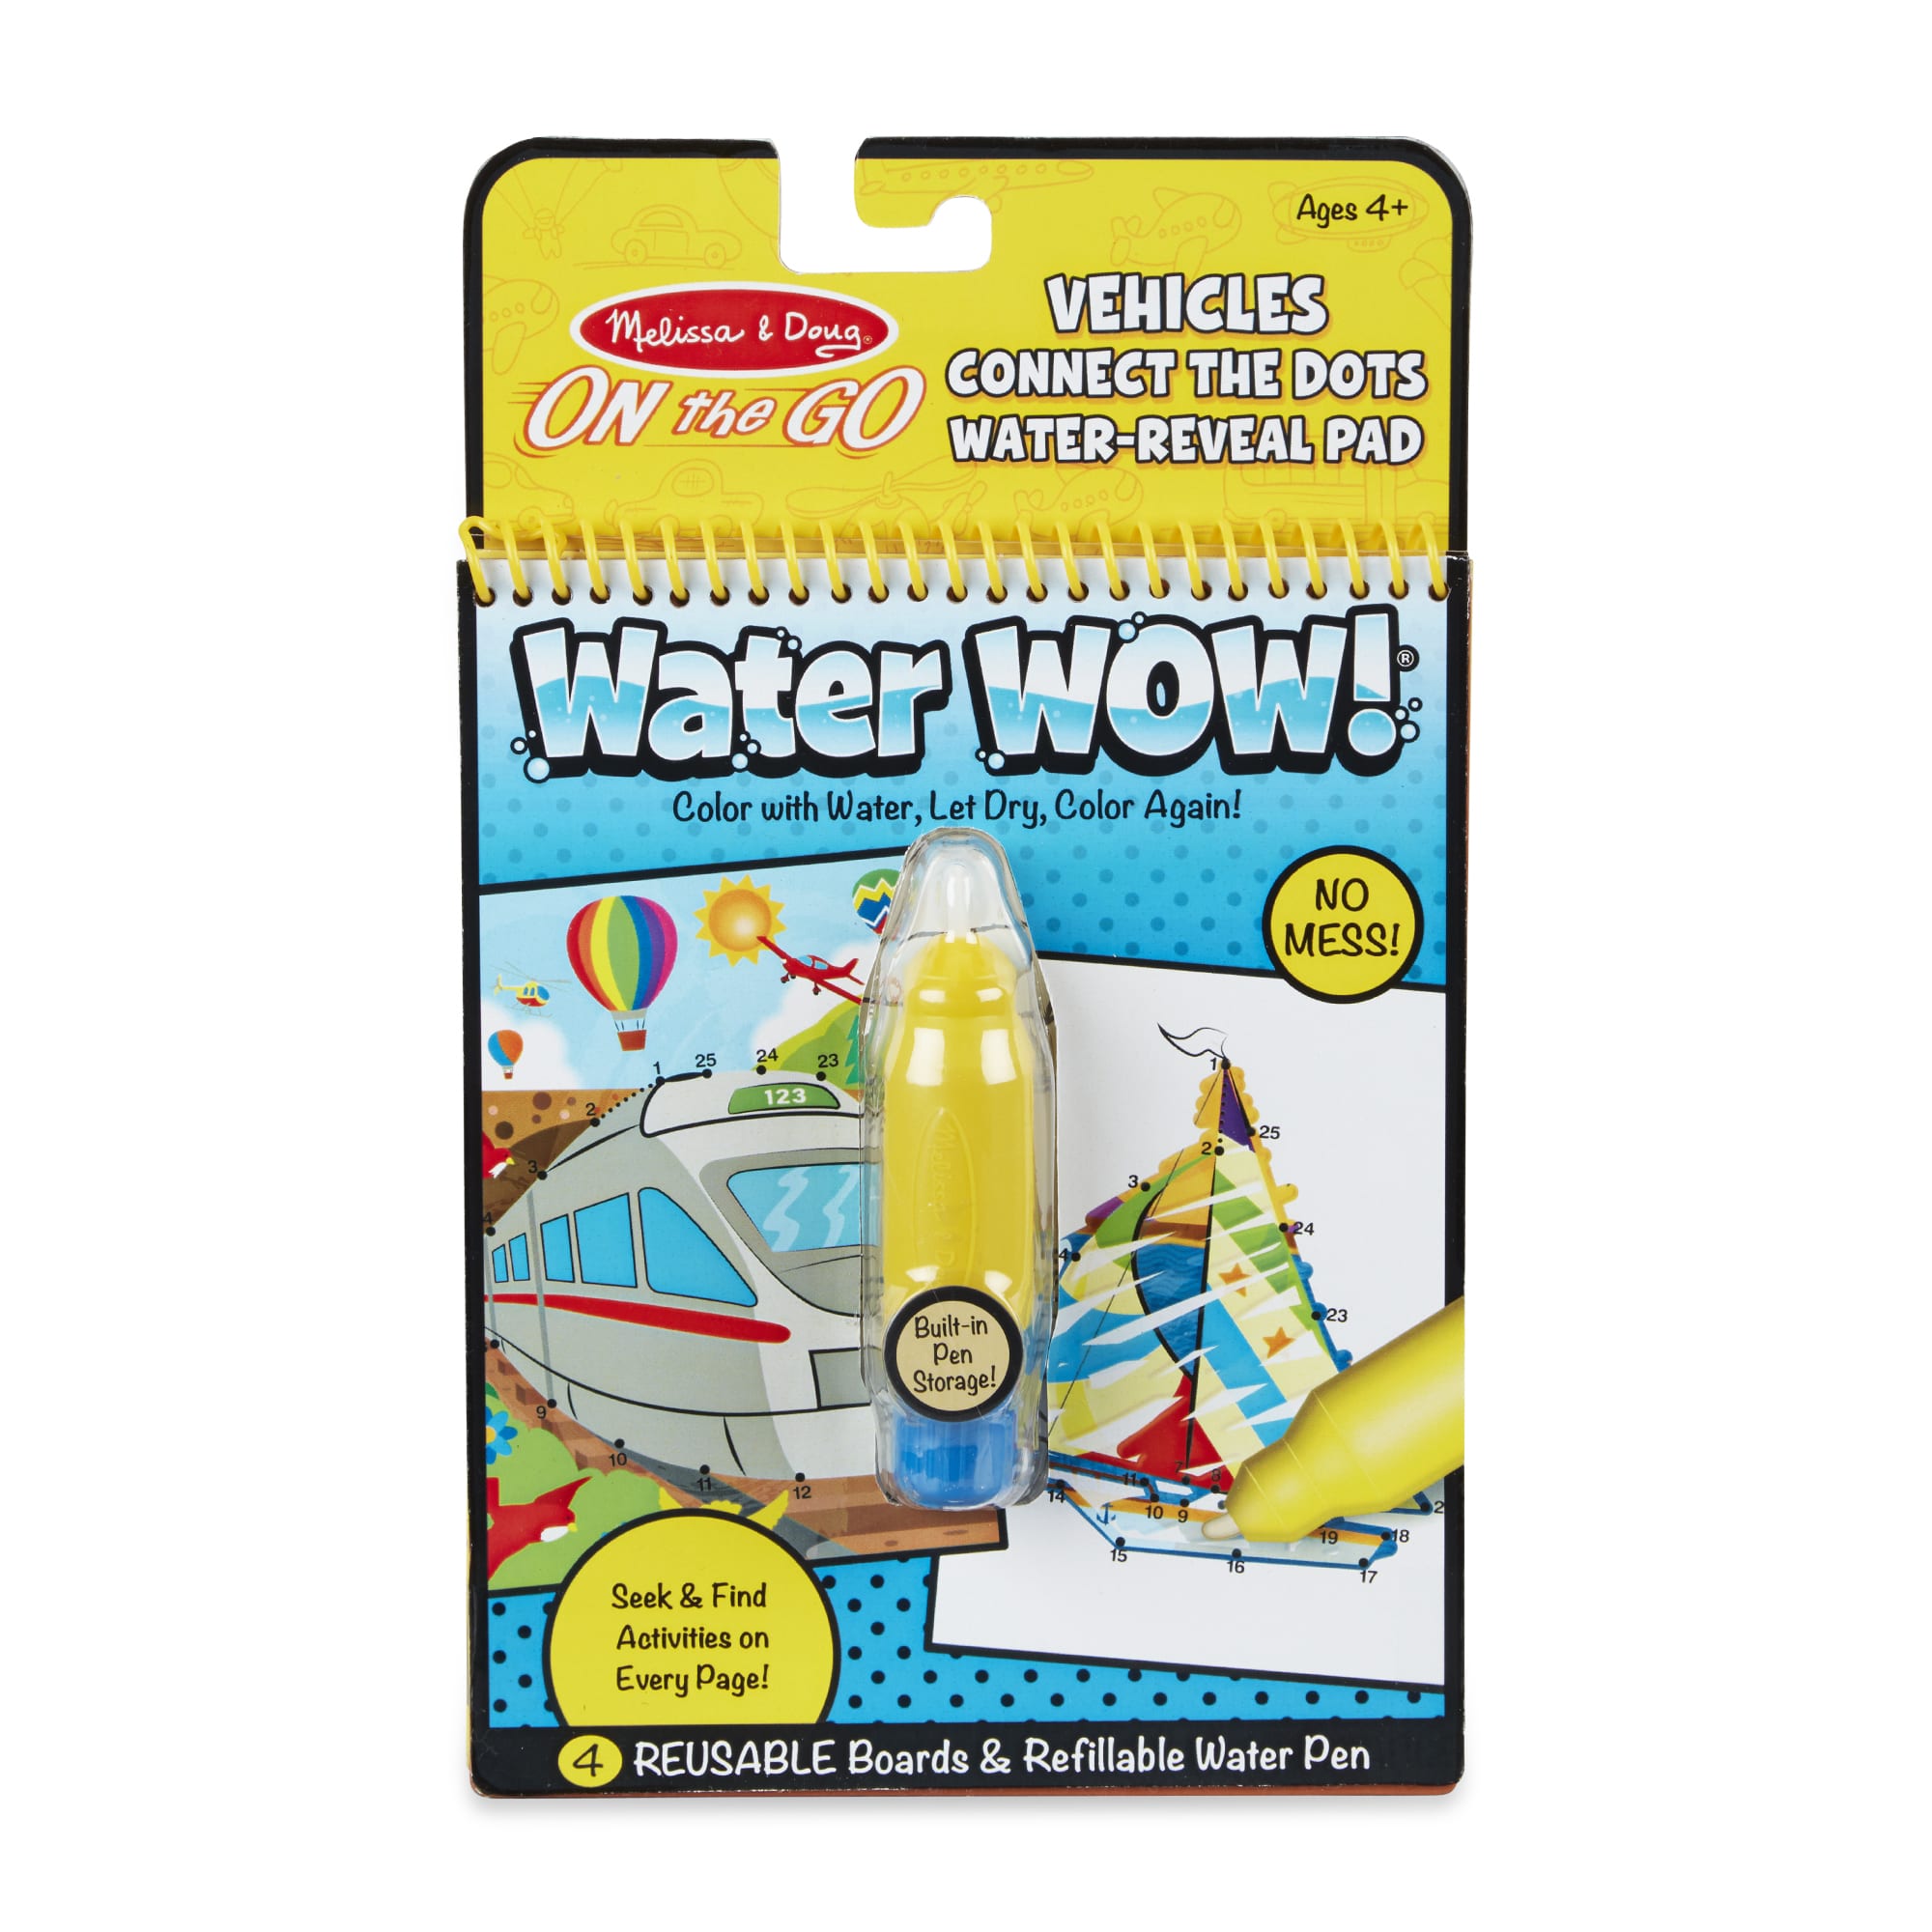 Water Wow! Vehicles Connect the Dots - On the Go Travel Activity